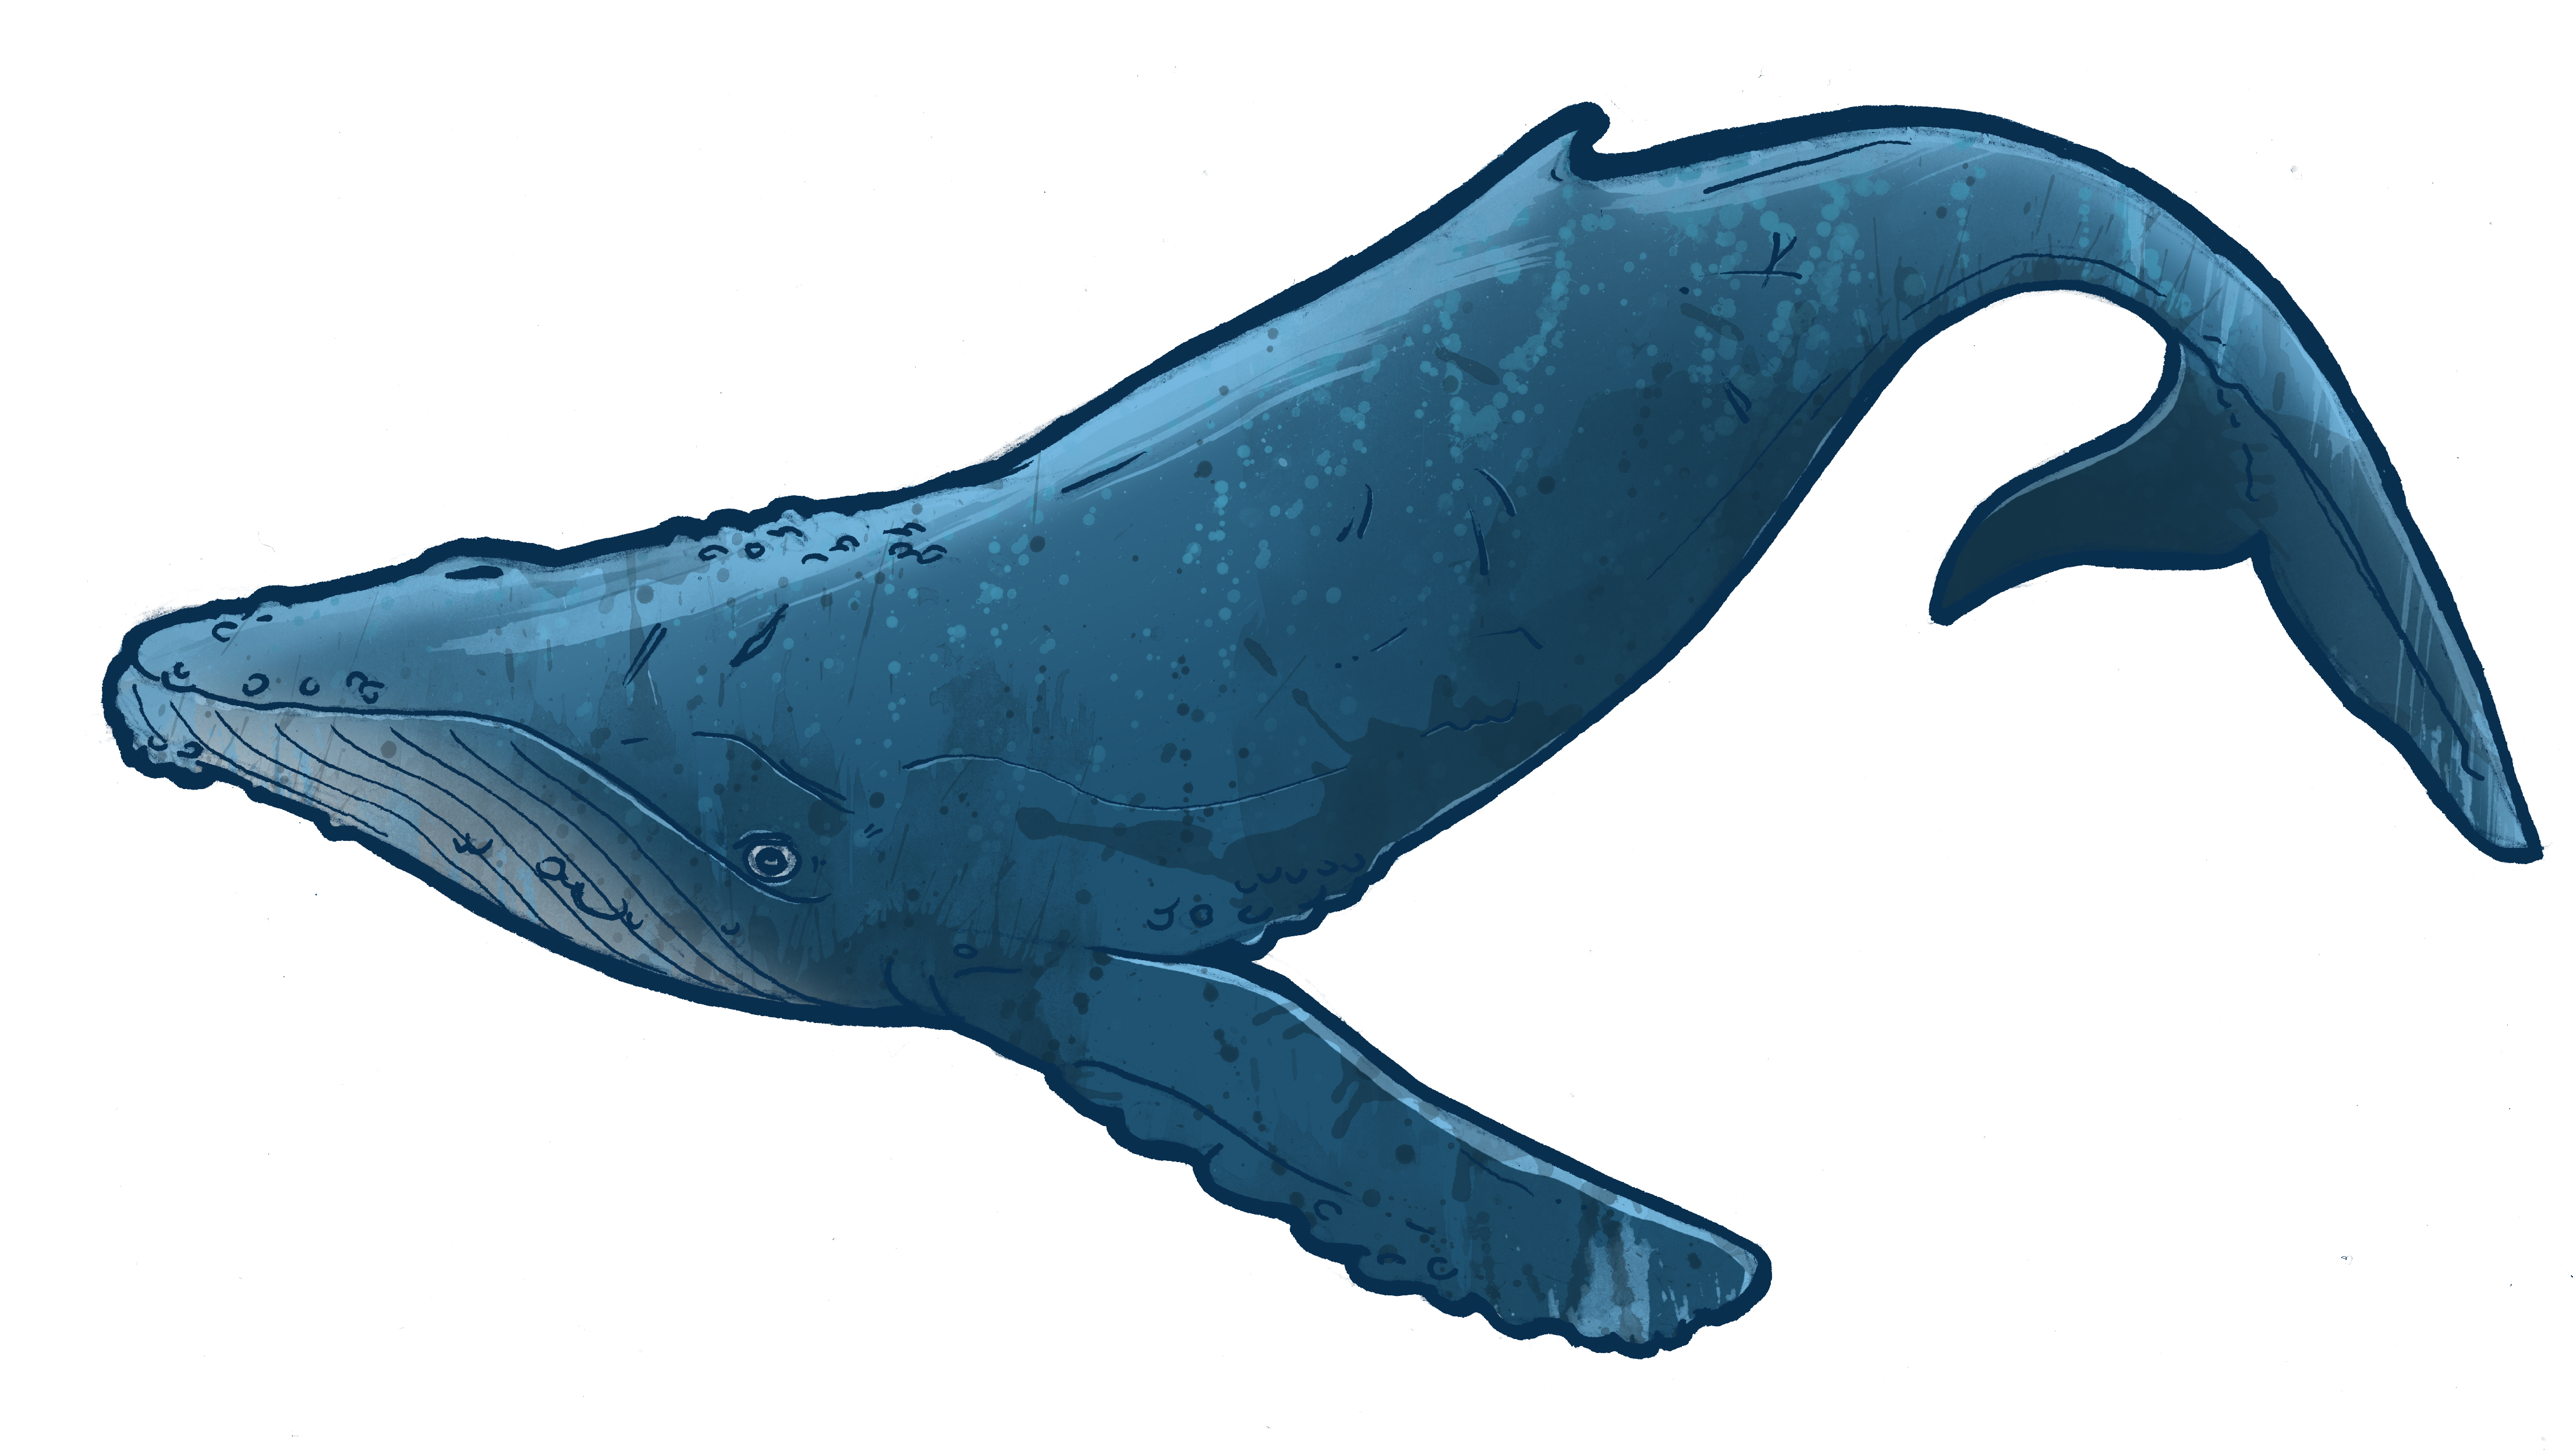 Baby Blue Whale Clip Art | Clipart library - Free Clipart Images